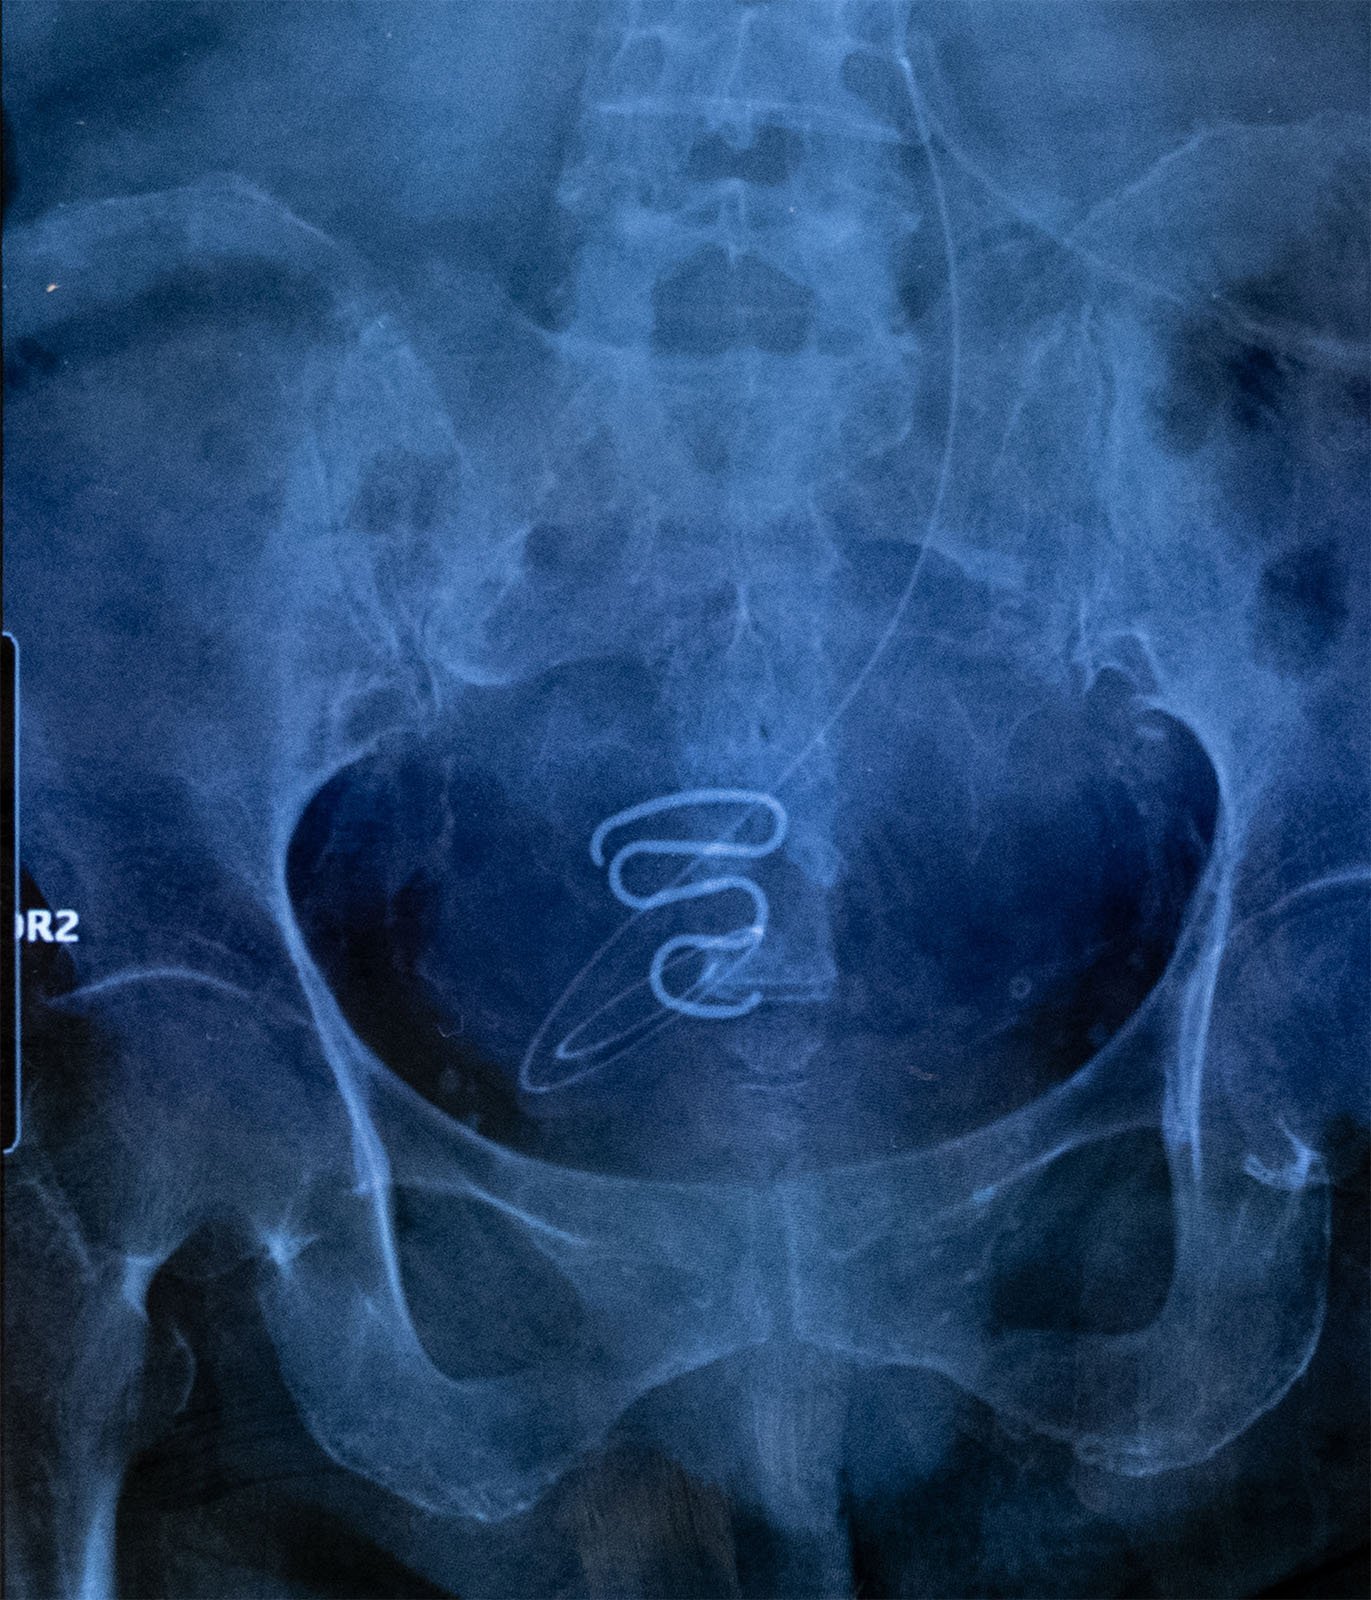 X-ray image showing a pelvic area with a visible intrauterine device (iud) in position.